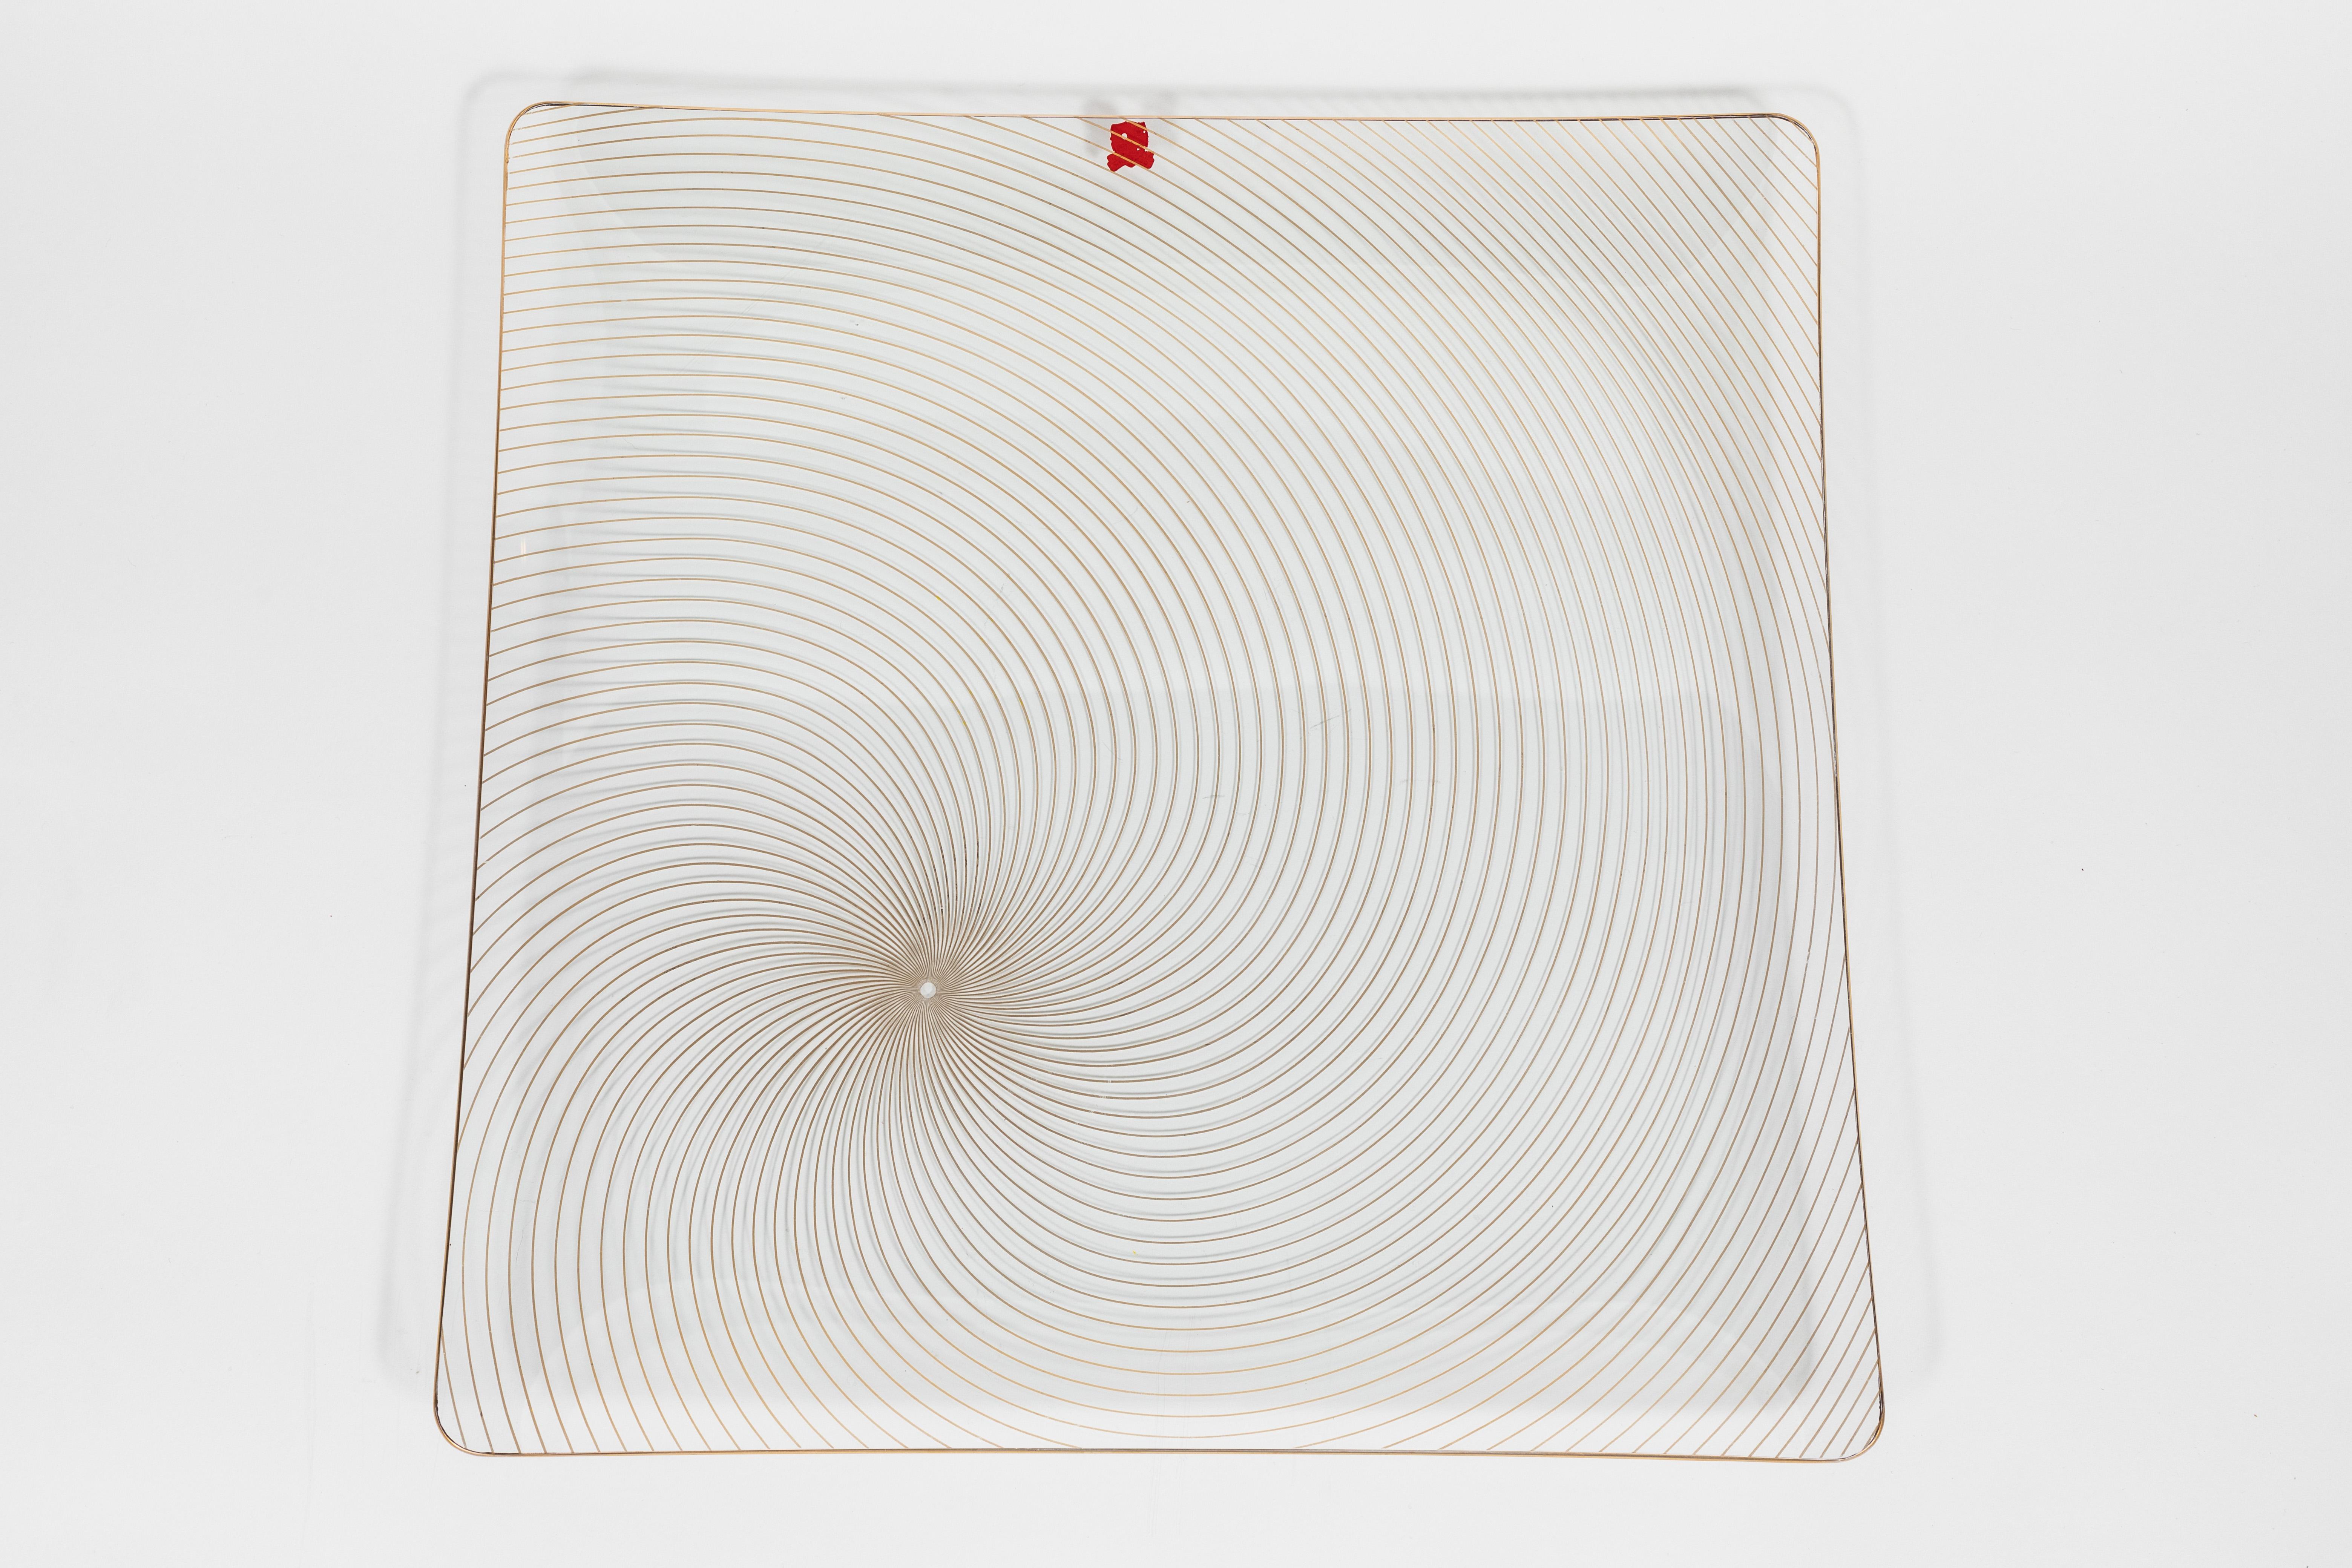 Midcentury Danish Op Art gold swirl platter

This collectible platter features fine bent clear glass and gold lines in a swirl pattern.

Made in the 1960s by MF Crystal & Art Glass MNFC in Denmark.